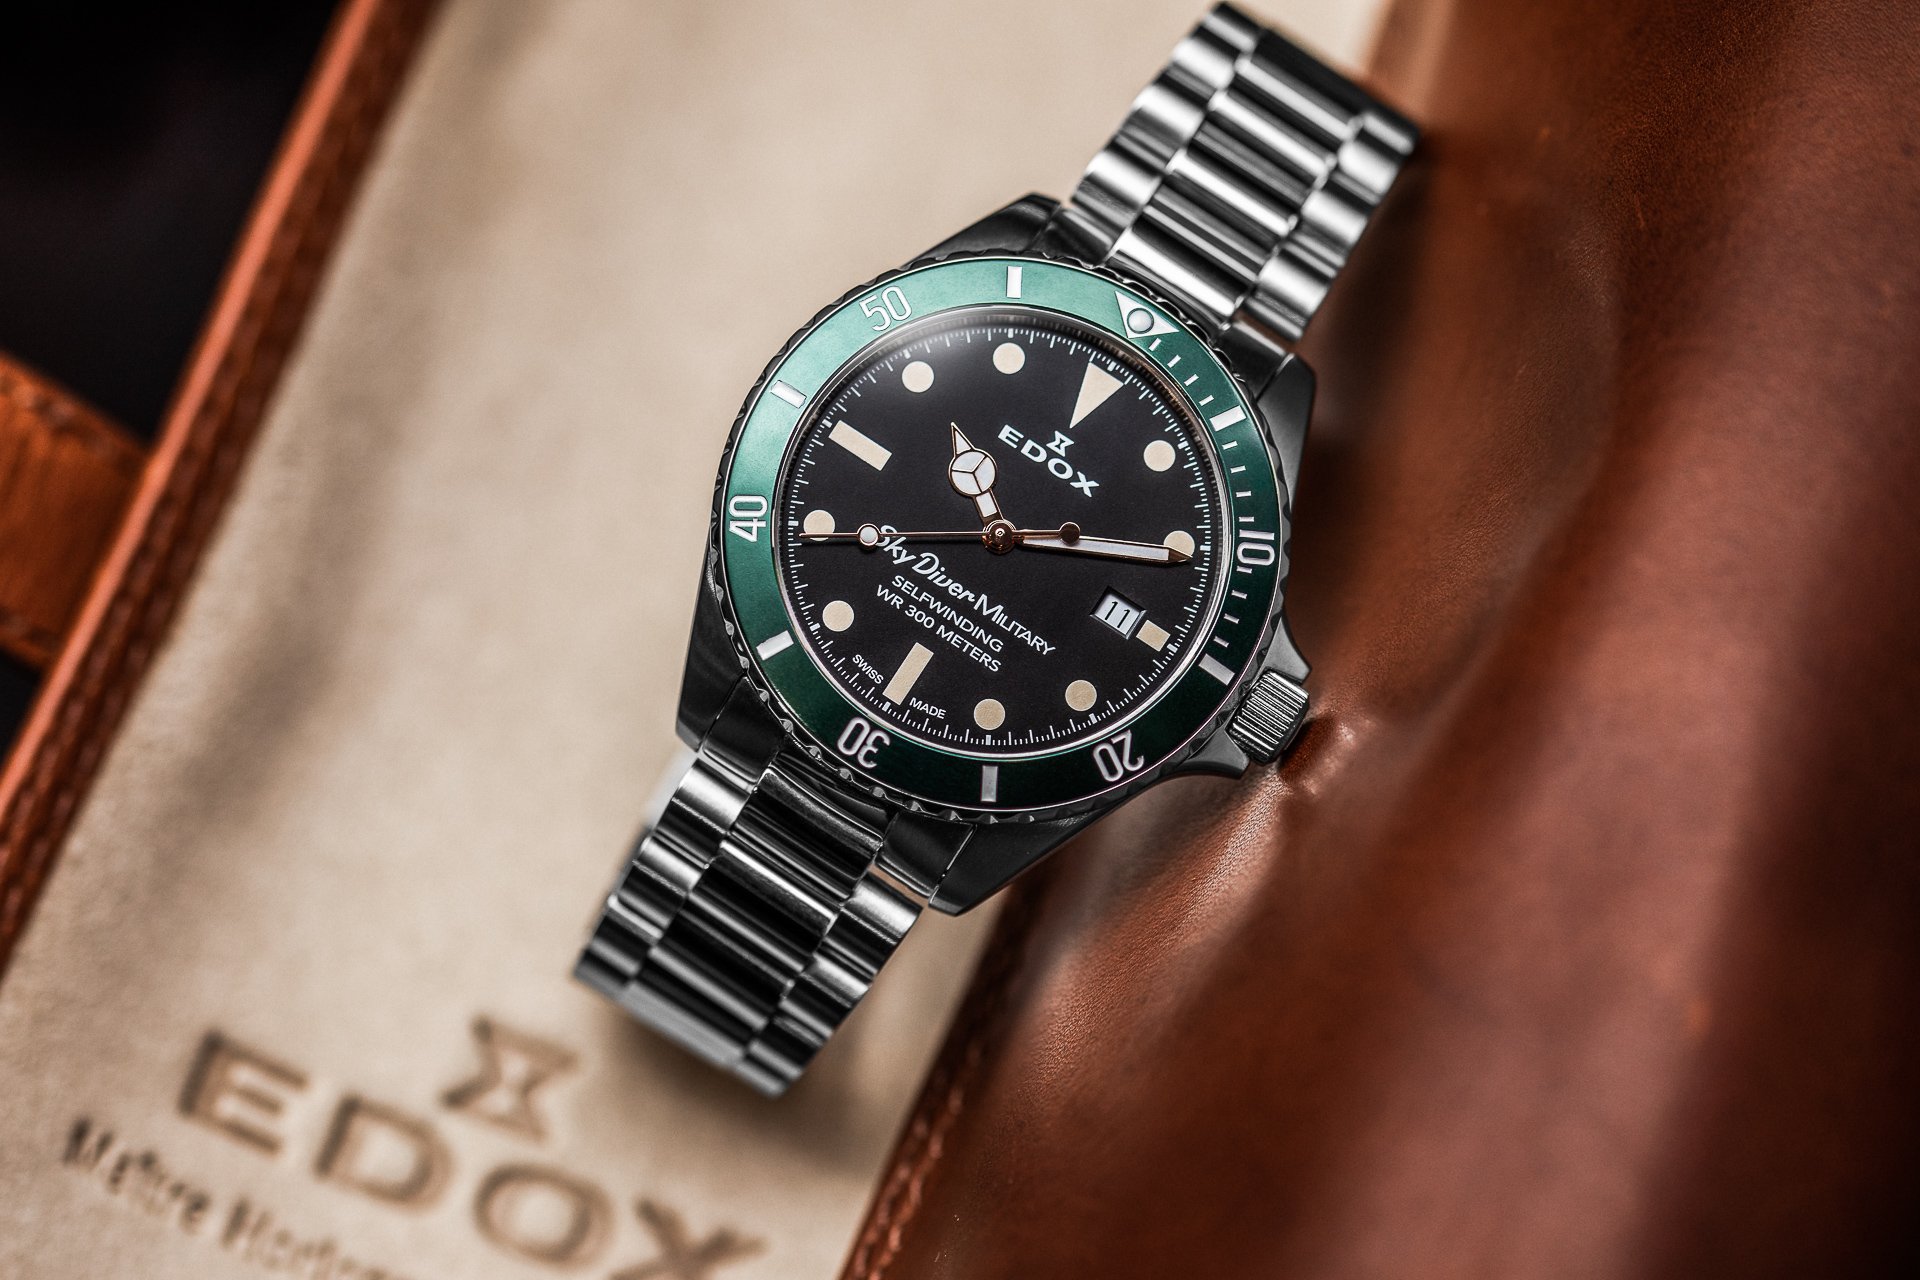 Presentation of the Edox SkyDiver Military with live pictures and 